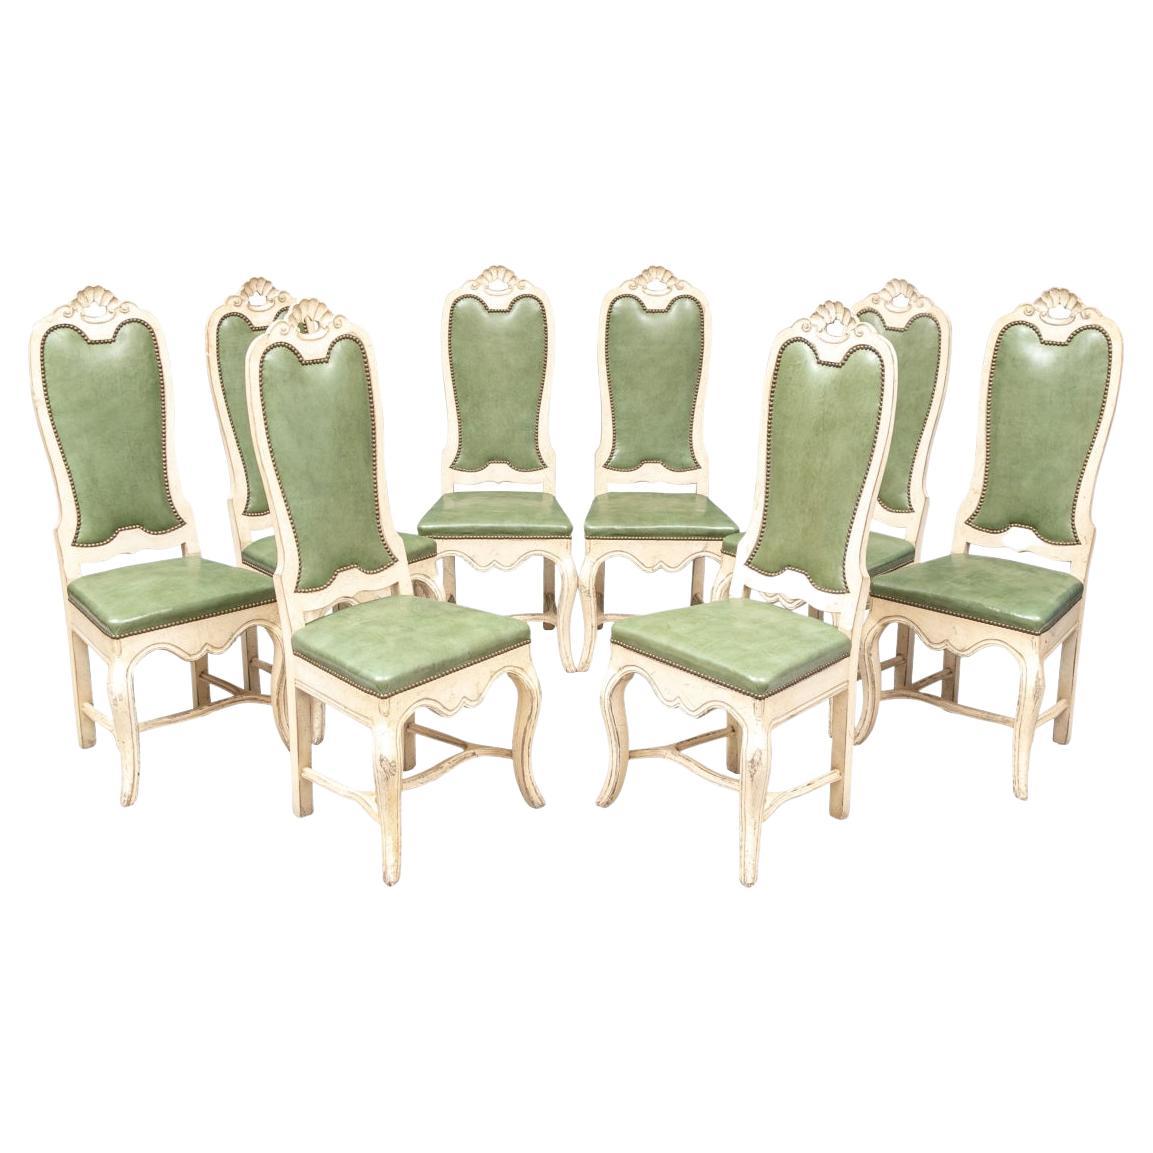 Set of 8 Cream Paint Decorated Fruitwood Dining Chairs with Green Faux Leather